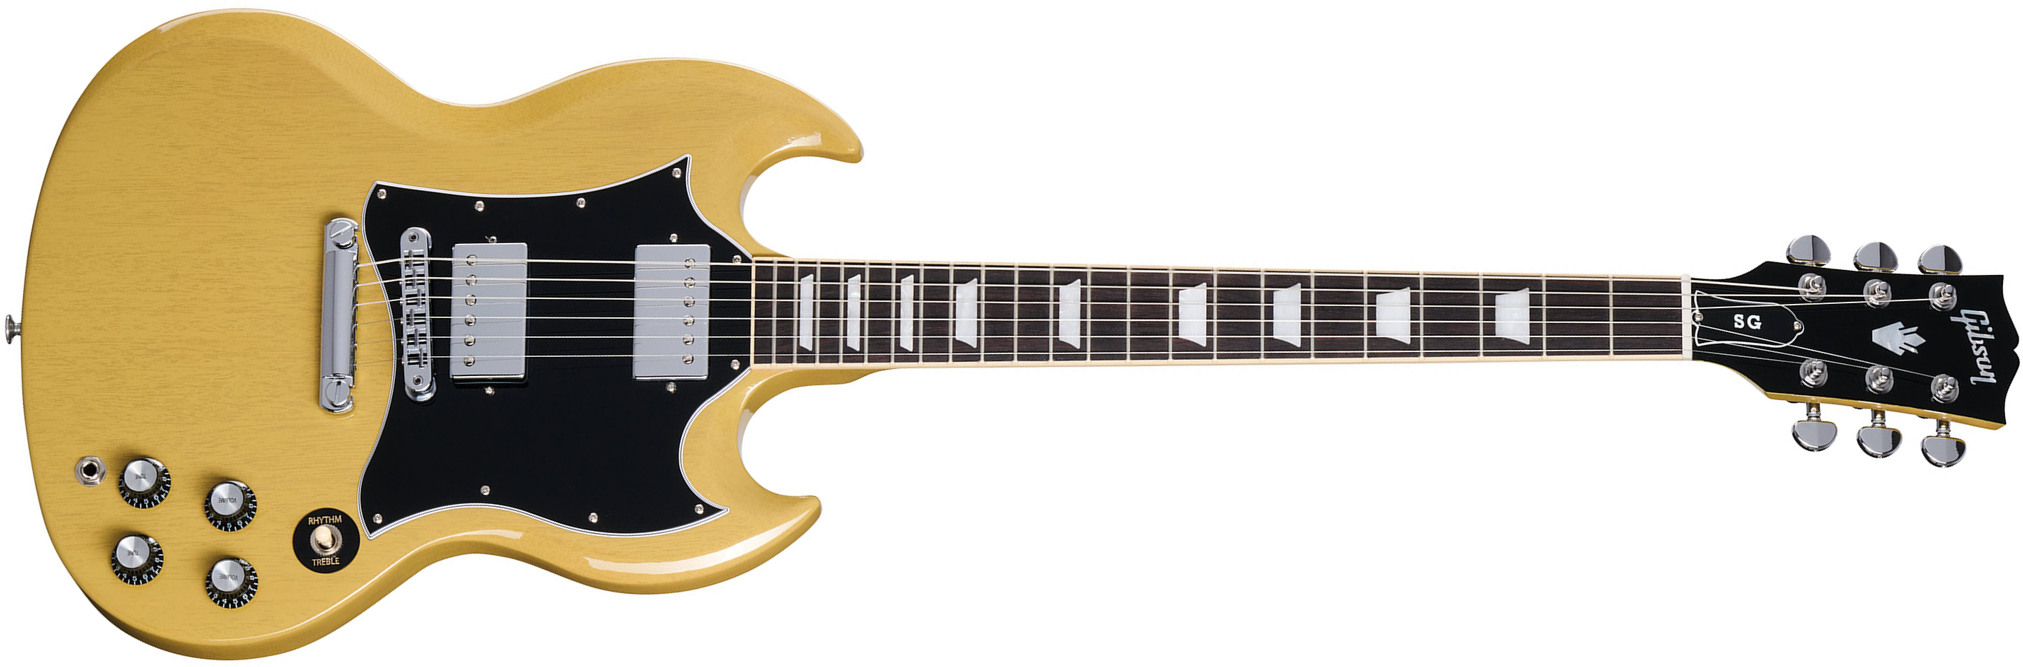 Gibson Sg Standard Custom Color 2h Ht Rw - Tv Yellow - Double cut electric guitar - Main picture